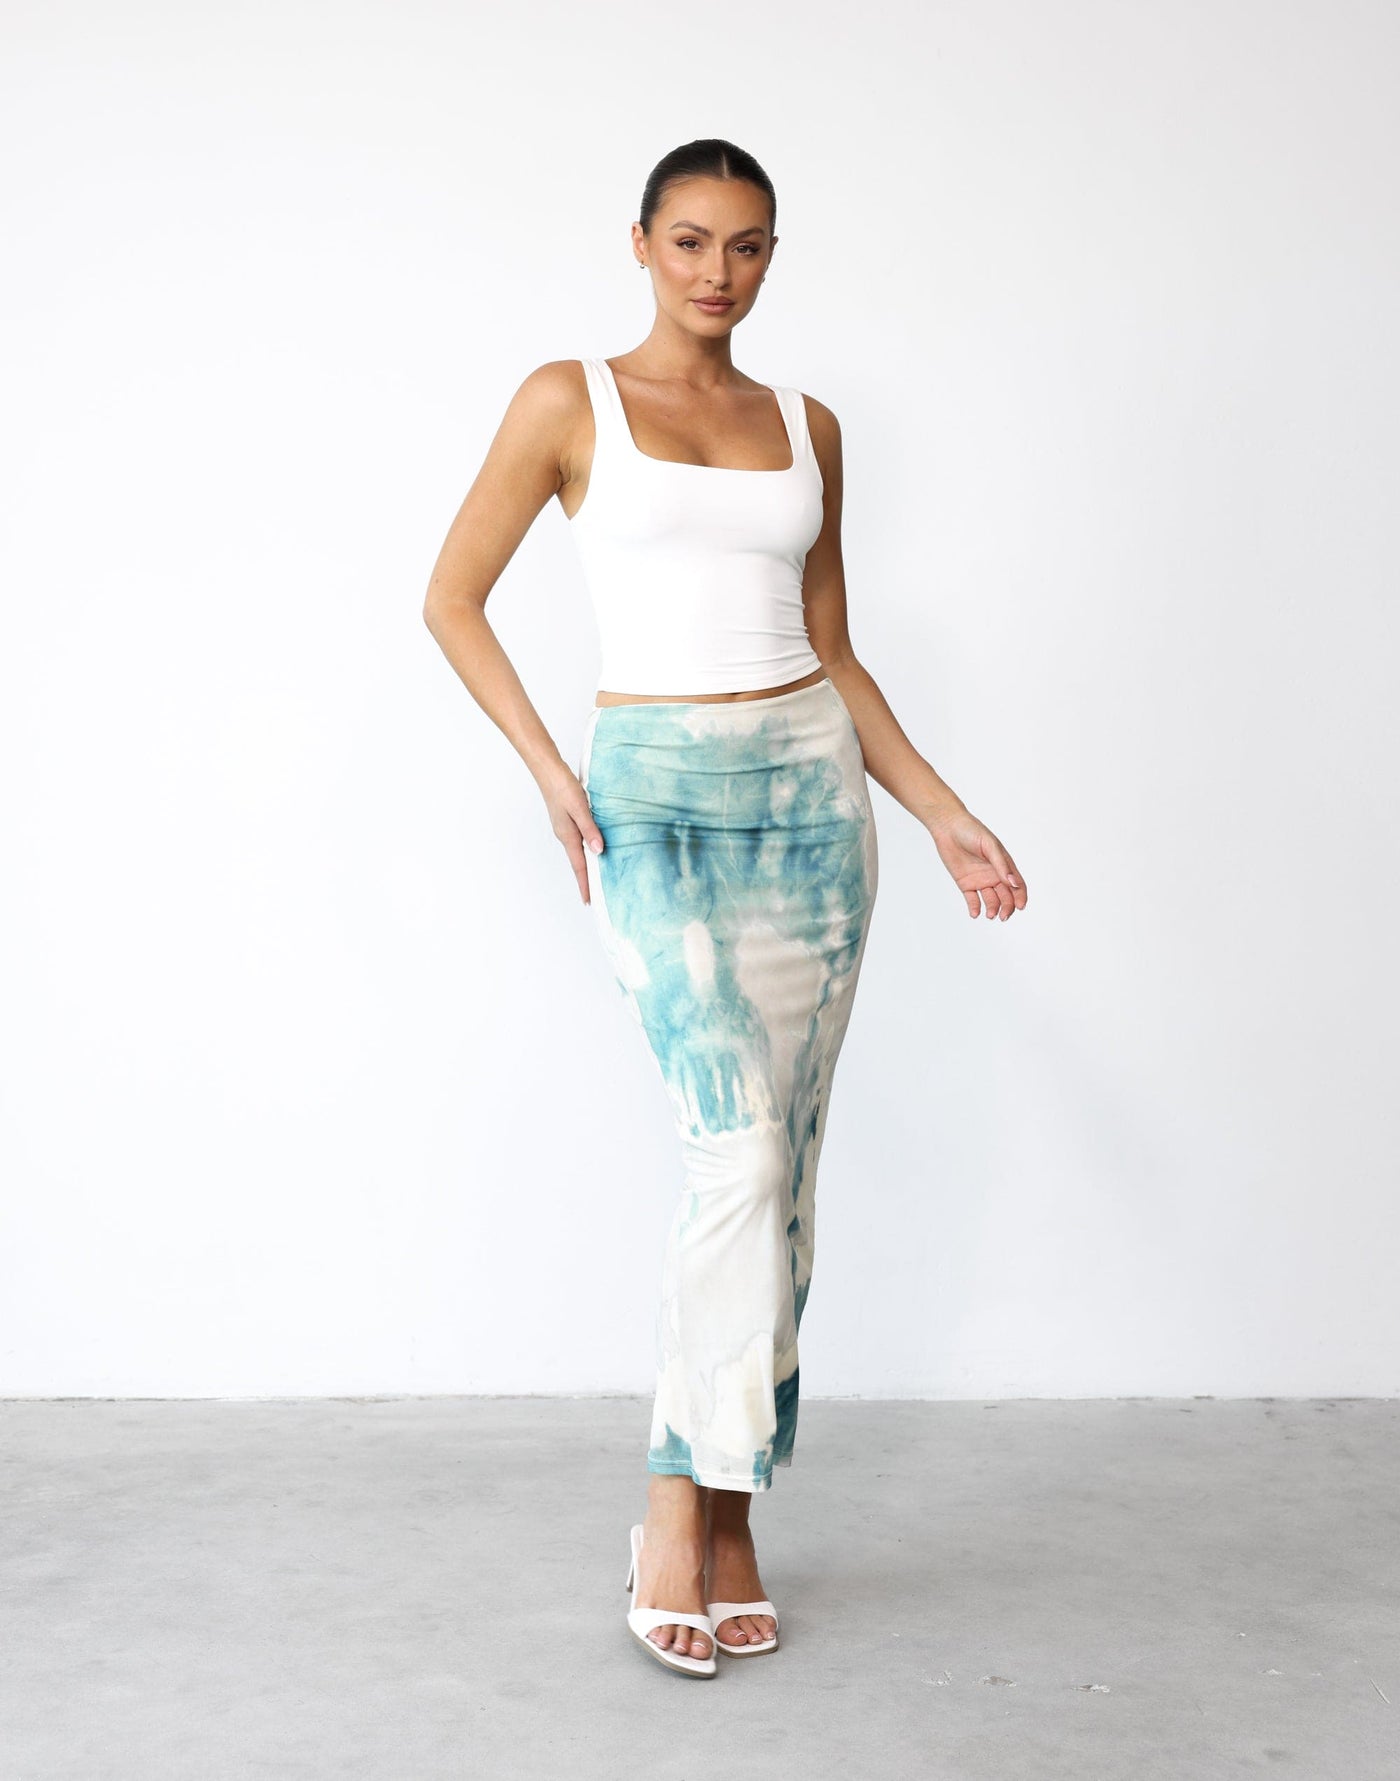 Tammy Maxi Skirt (Blue Marble) | Charcoal Clothing Exclusive - Printed Mesh Overlay Bodycon Skirt - Women's Skirt - Charcoal Clothing